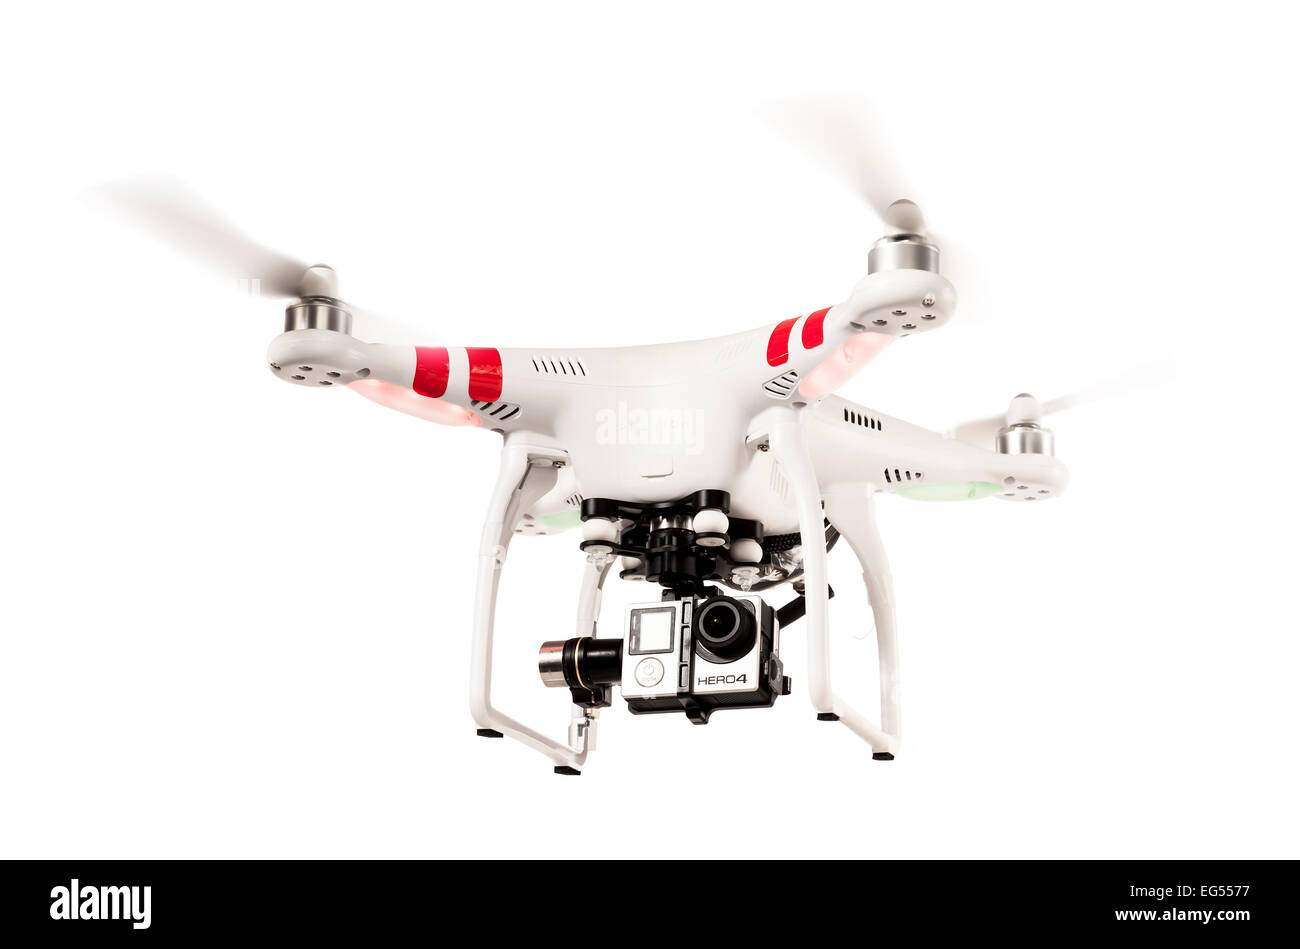 A DJI phantom quadcopter or drone flying on a white background Stock Photo